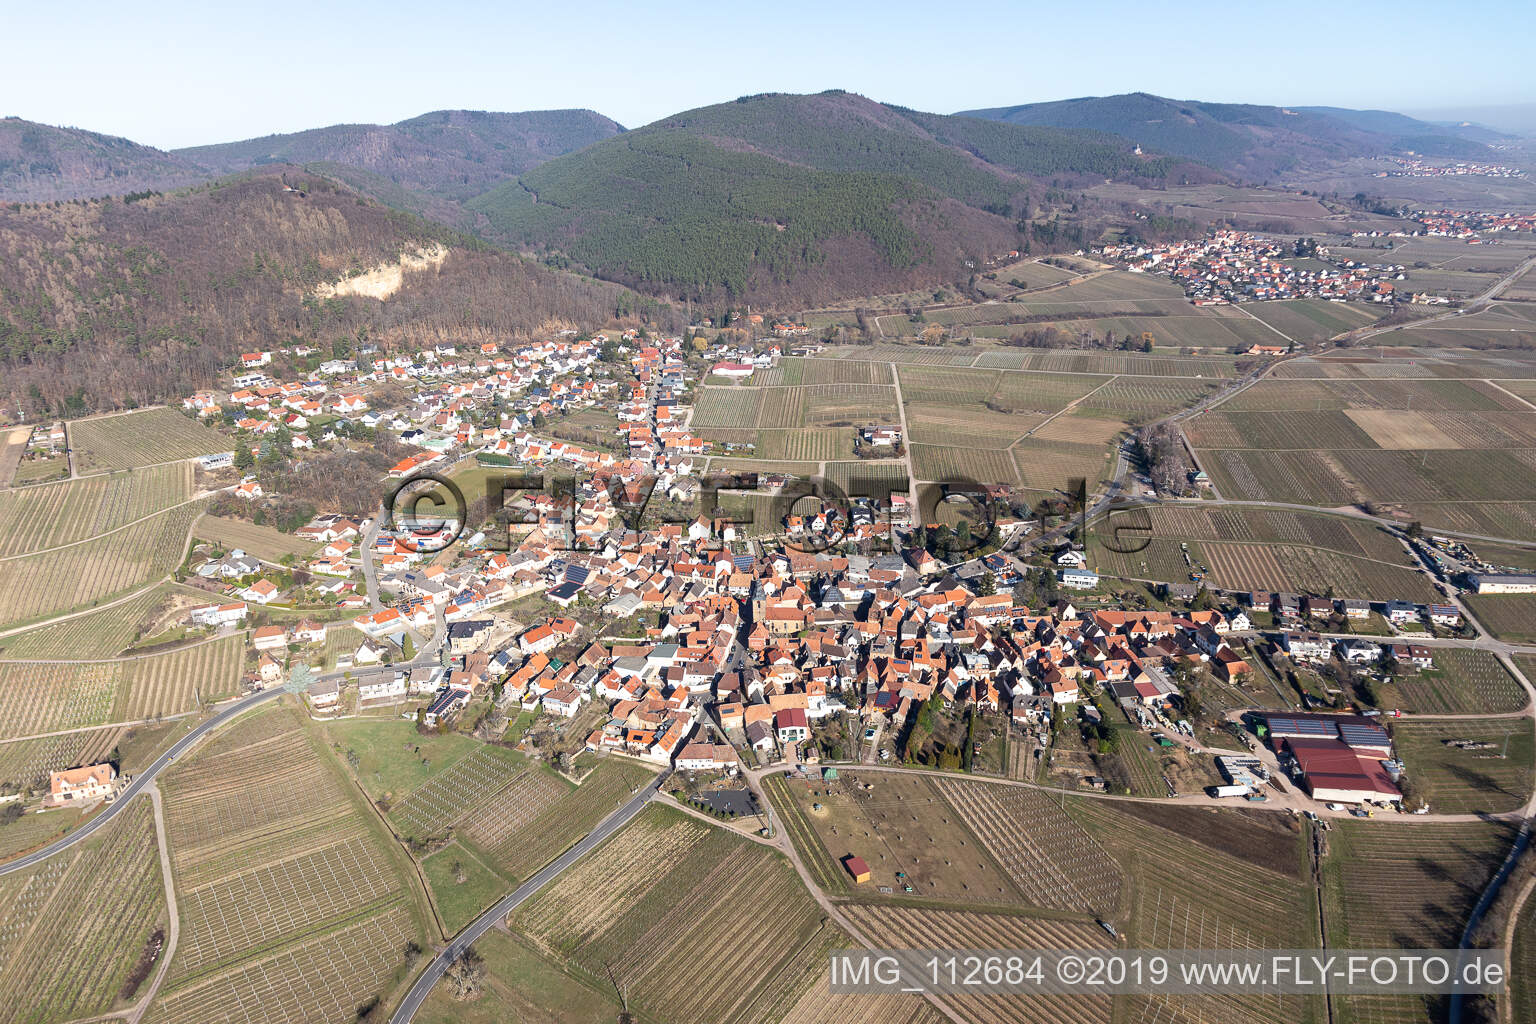 Drone recording of Frankweiler in the state Rhineland-Palatinate, Germany